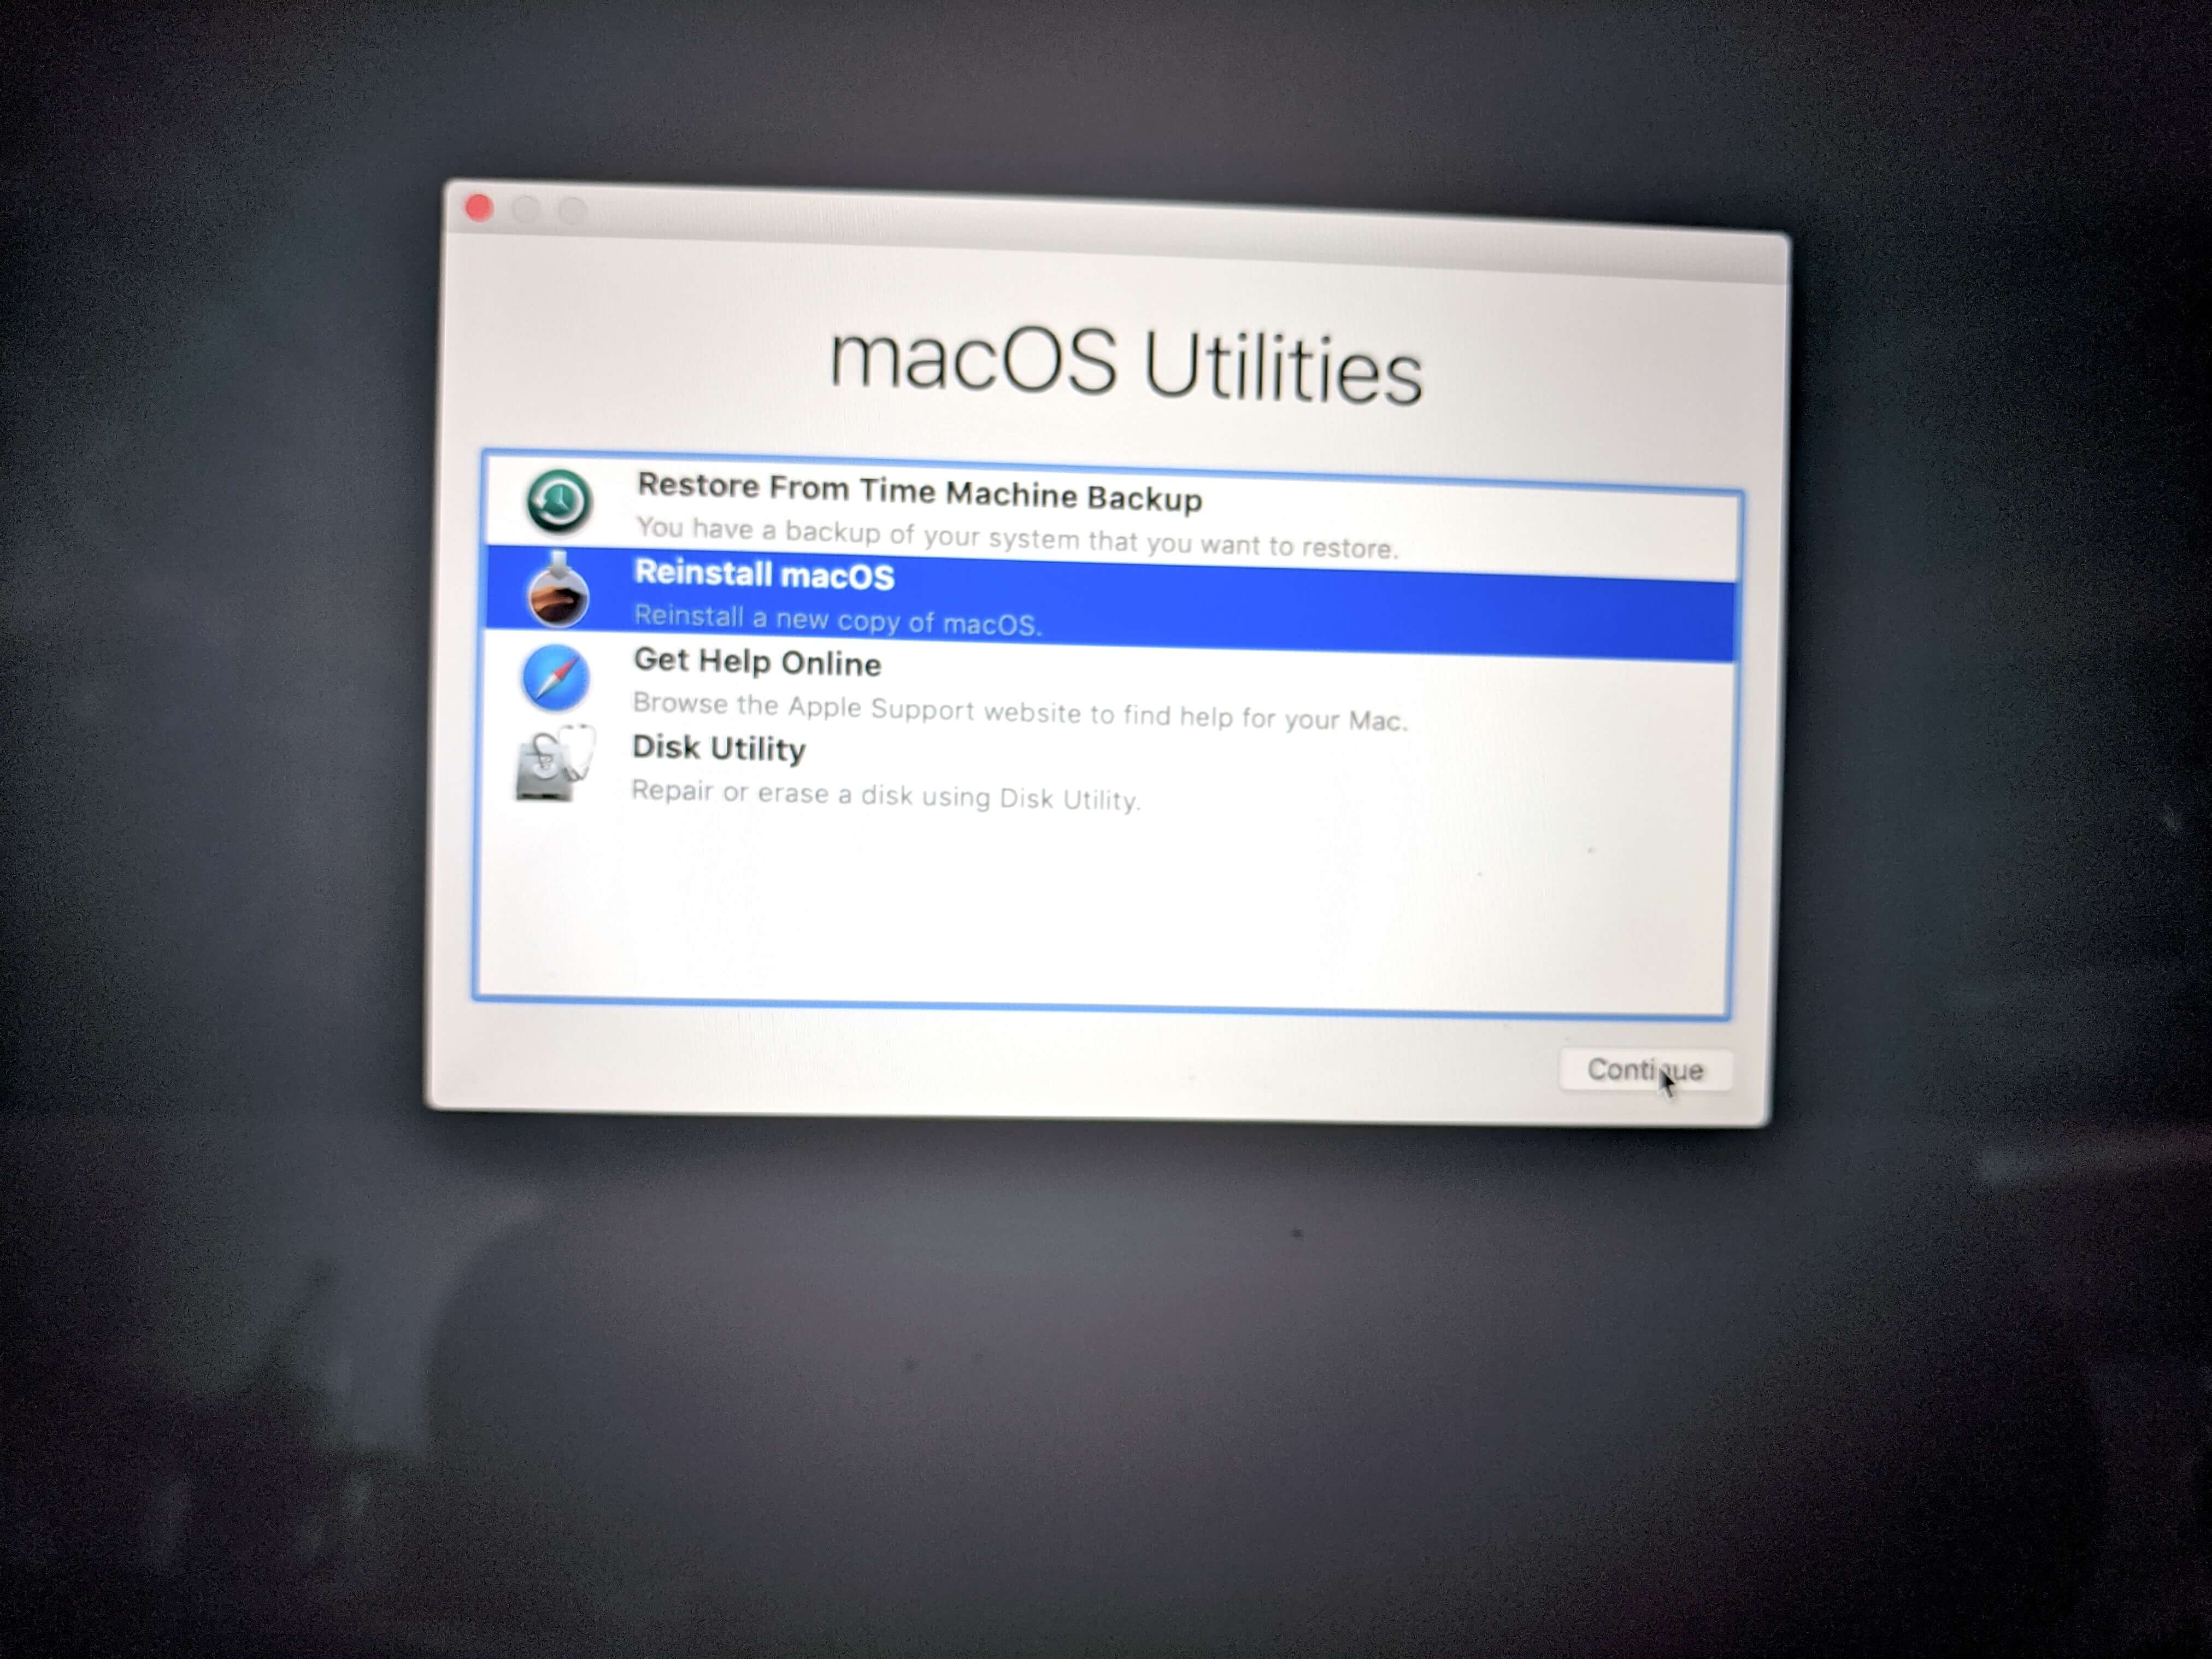 Exit Disk Utility, select 'Reinstall macOS on the System Restore main screen